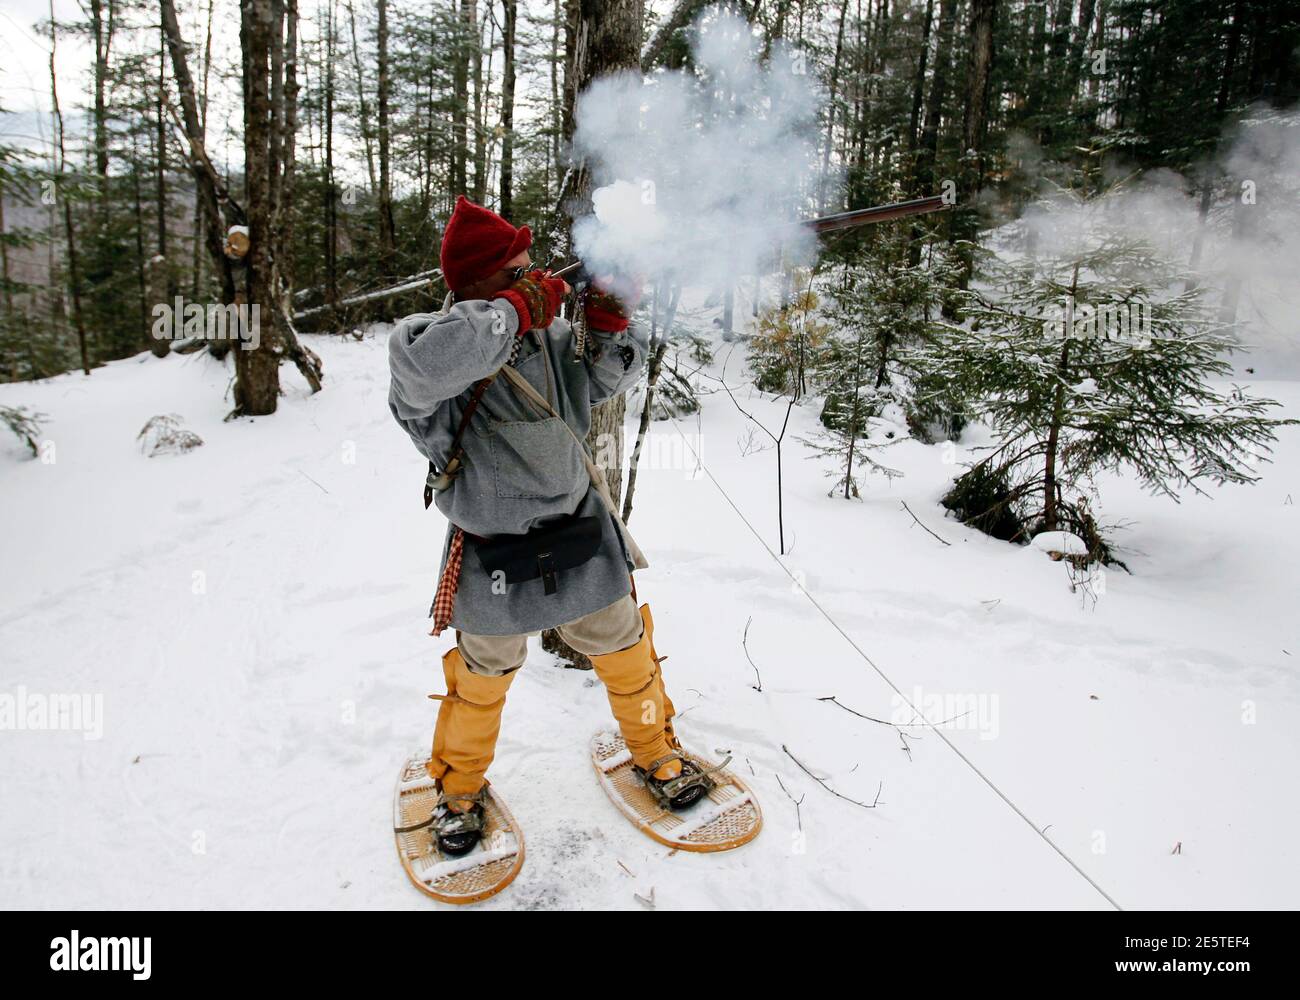 A man fires his rifle as he competes in the Primitive Biathlon in Dalton, New Hampshire February 16, 2013. The Dalton Gang, a single action shooting club, holds the annual Primitive Biathlon in which competitors wear snowshoes and fire single shot muzzle loaded firearms at four stations along a 1.75 mile course. REUTERS/Jessica Rinaldi (UNITED STATES - Tags: SOCIETY SPORT) Stock Photo